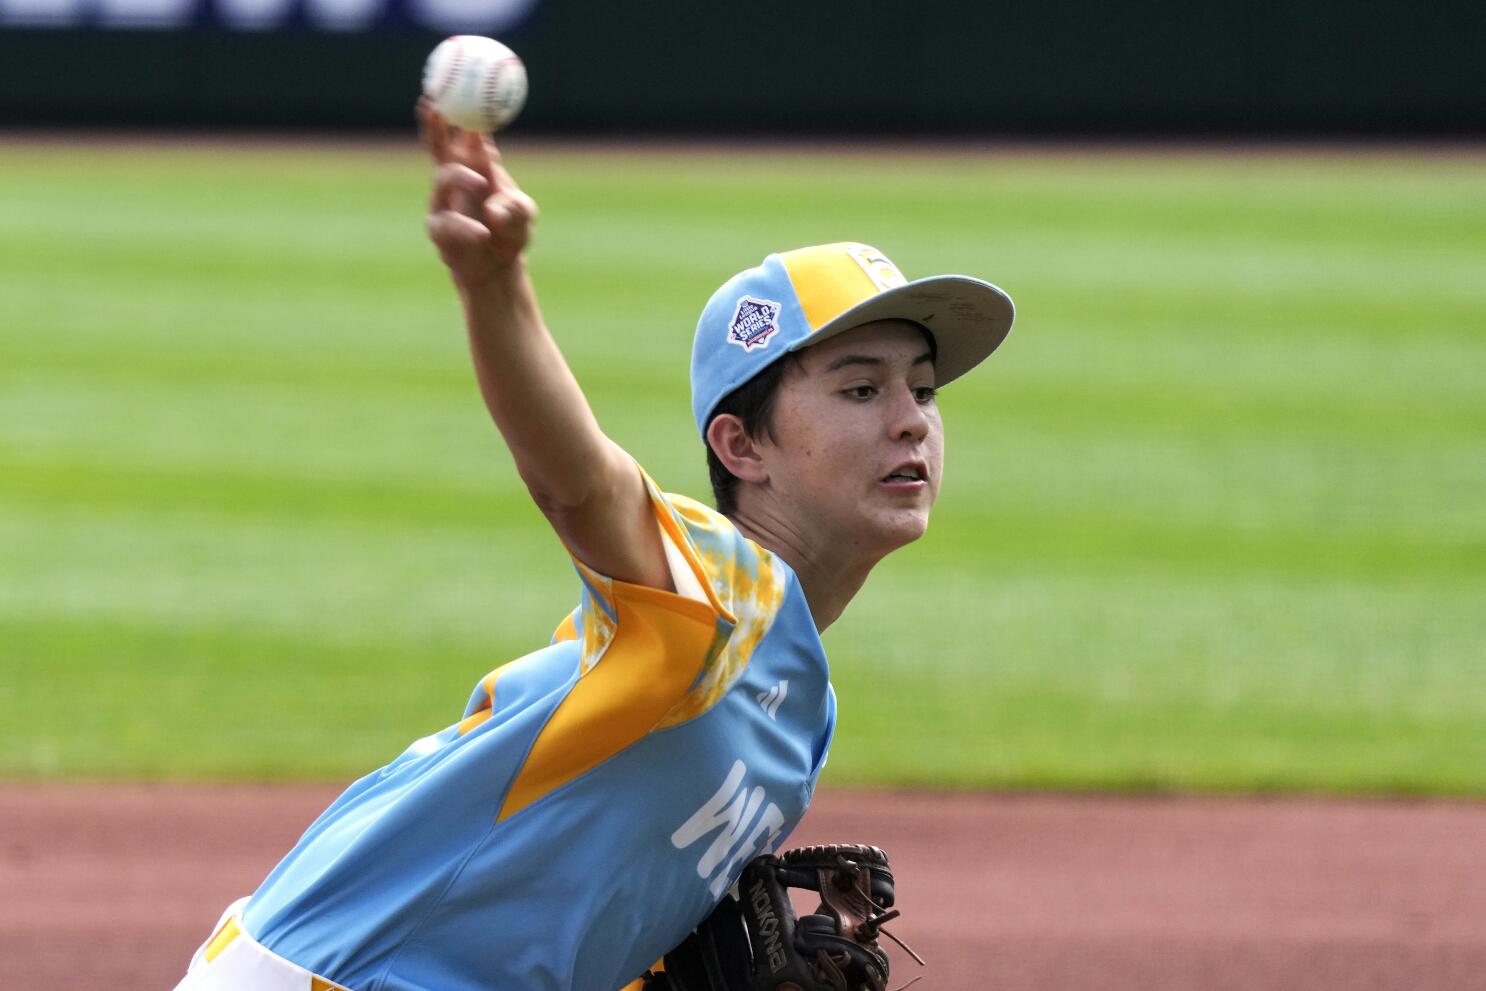 West Wins Game One Of Little League World Series